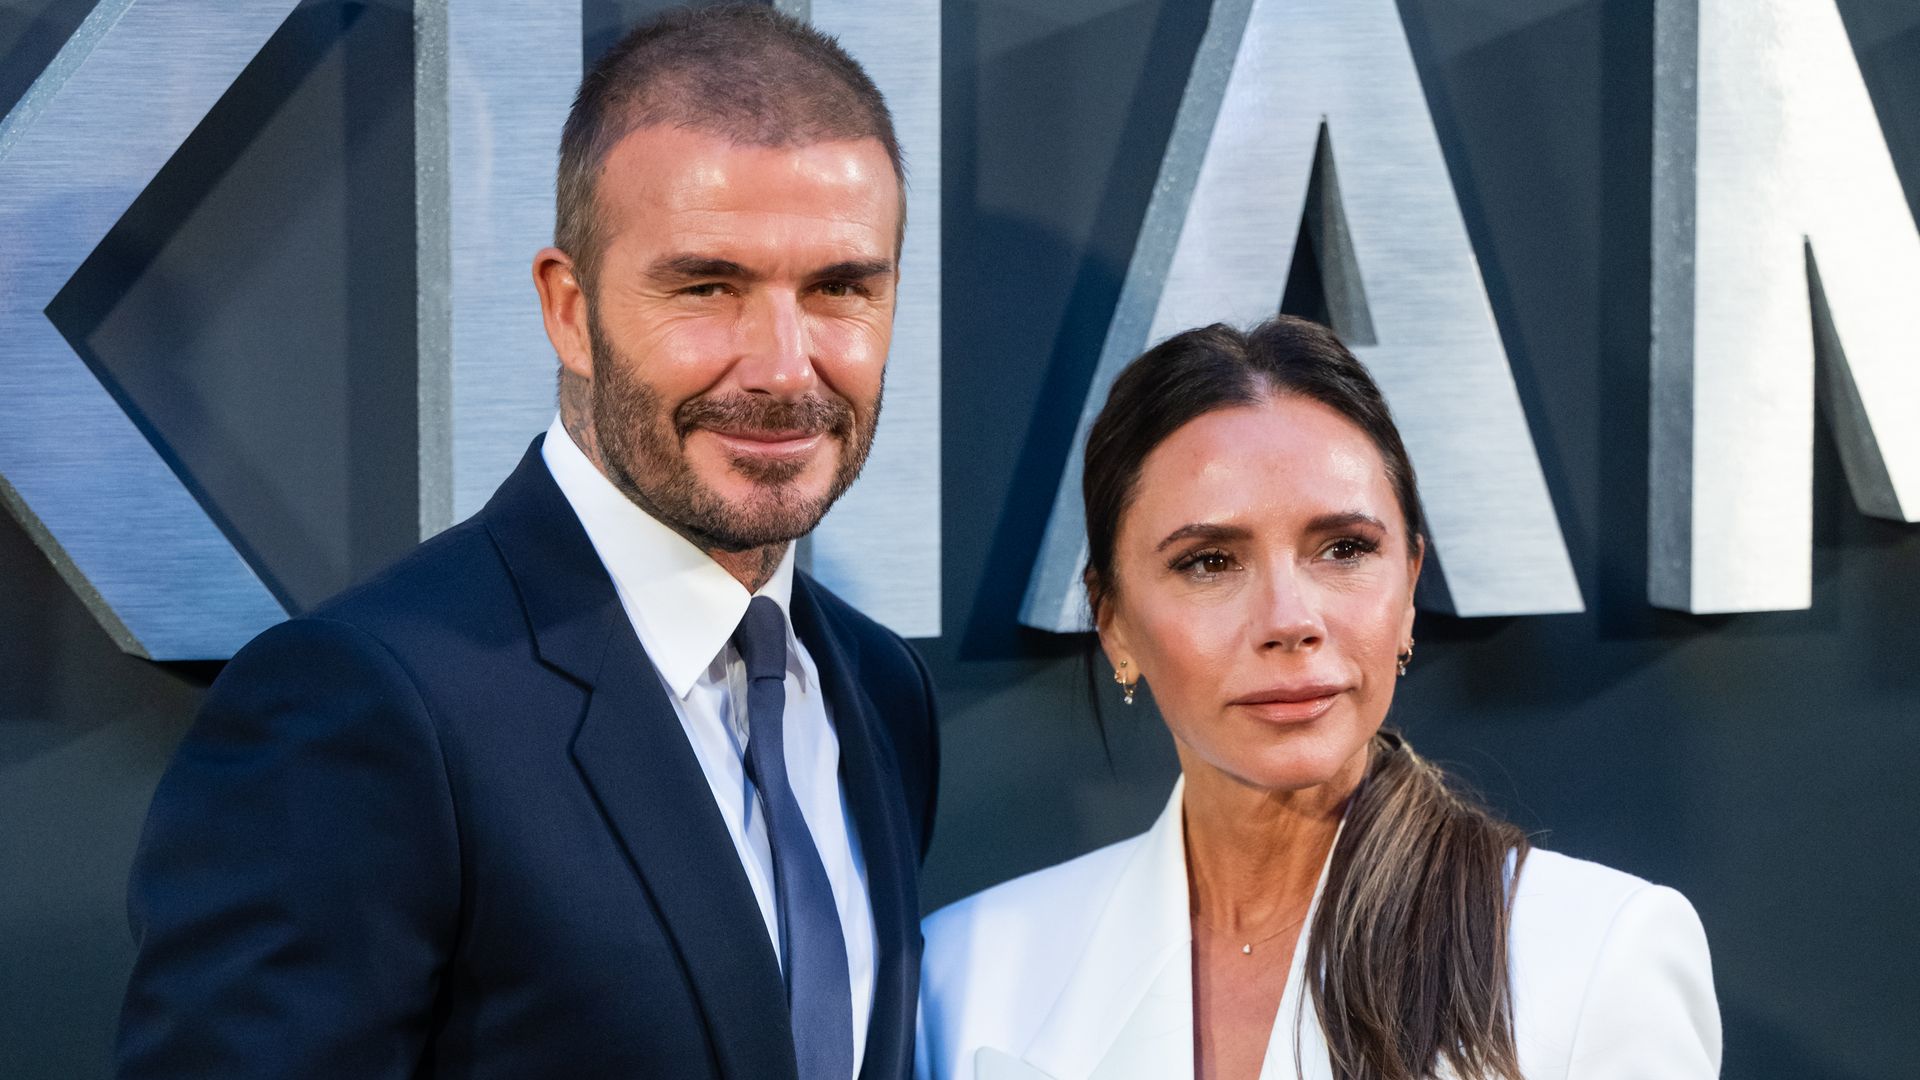 Victoria and David Beckham travel in style with the ultimate luxury bags